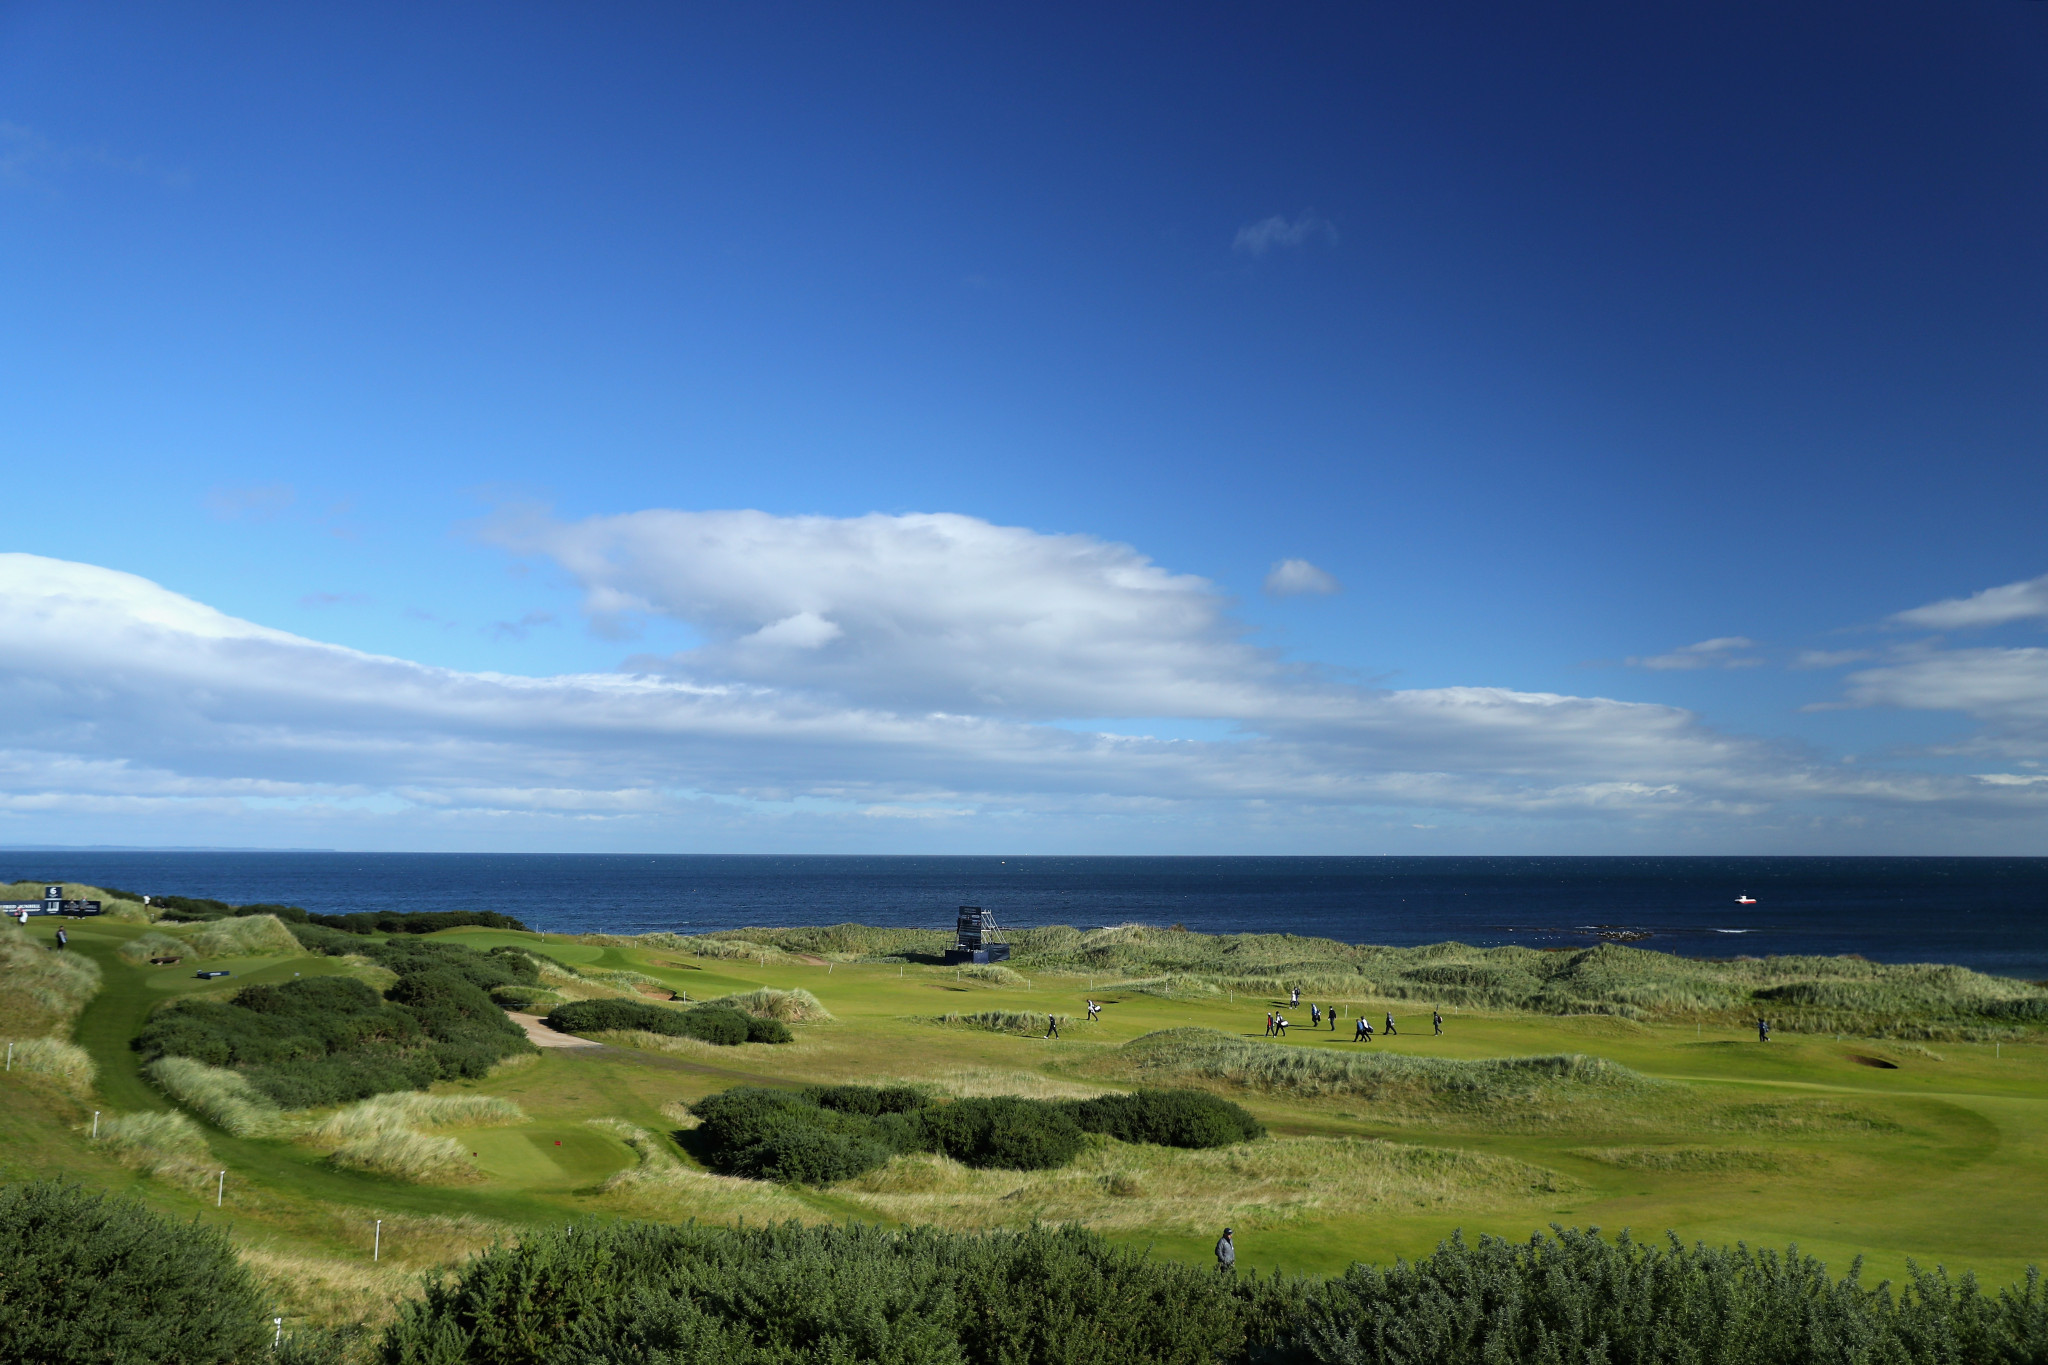 St Andrews to host historic 150th edition of The Open in 2021